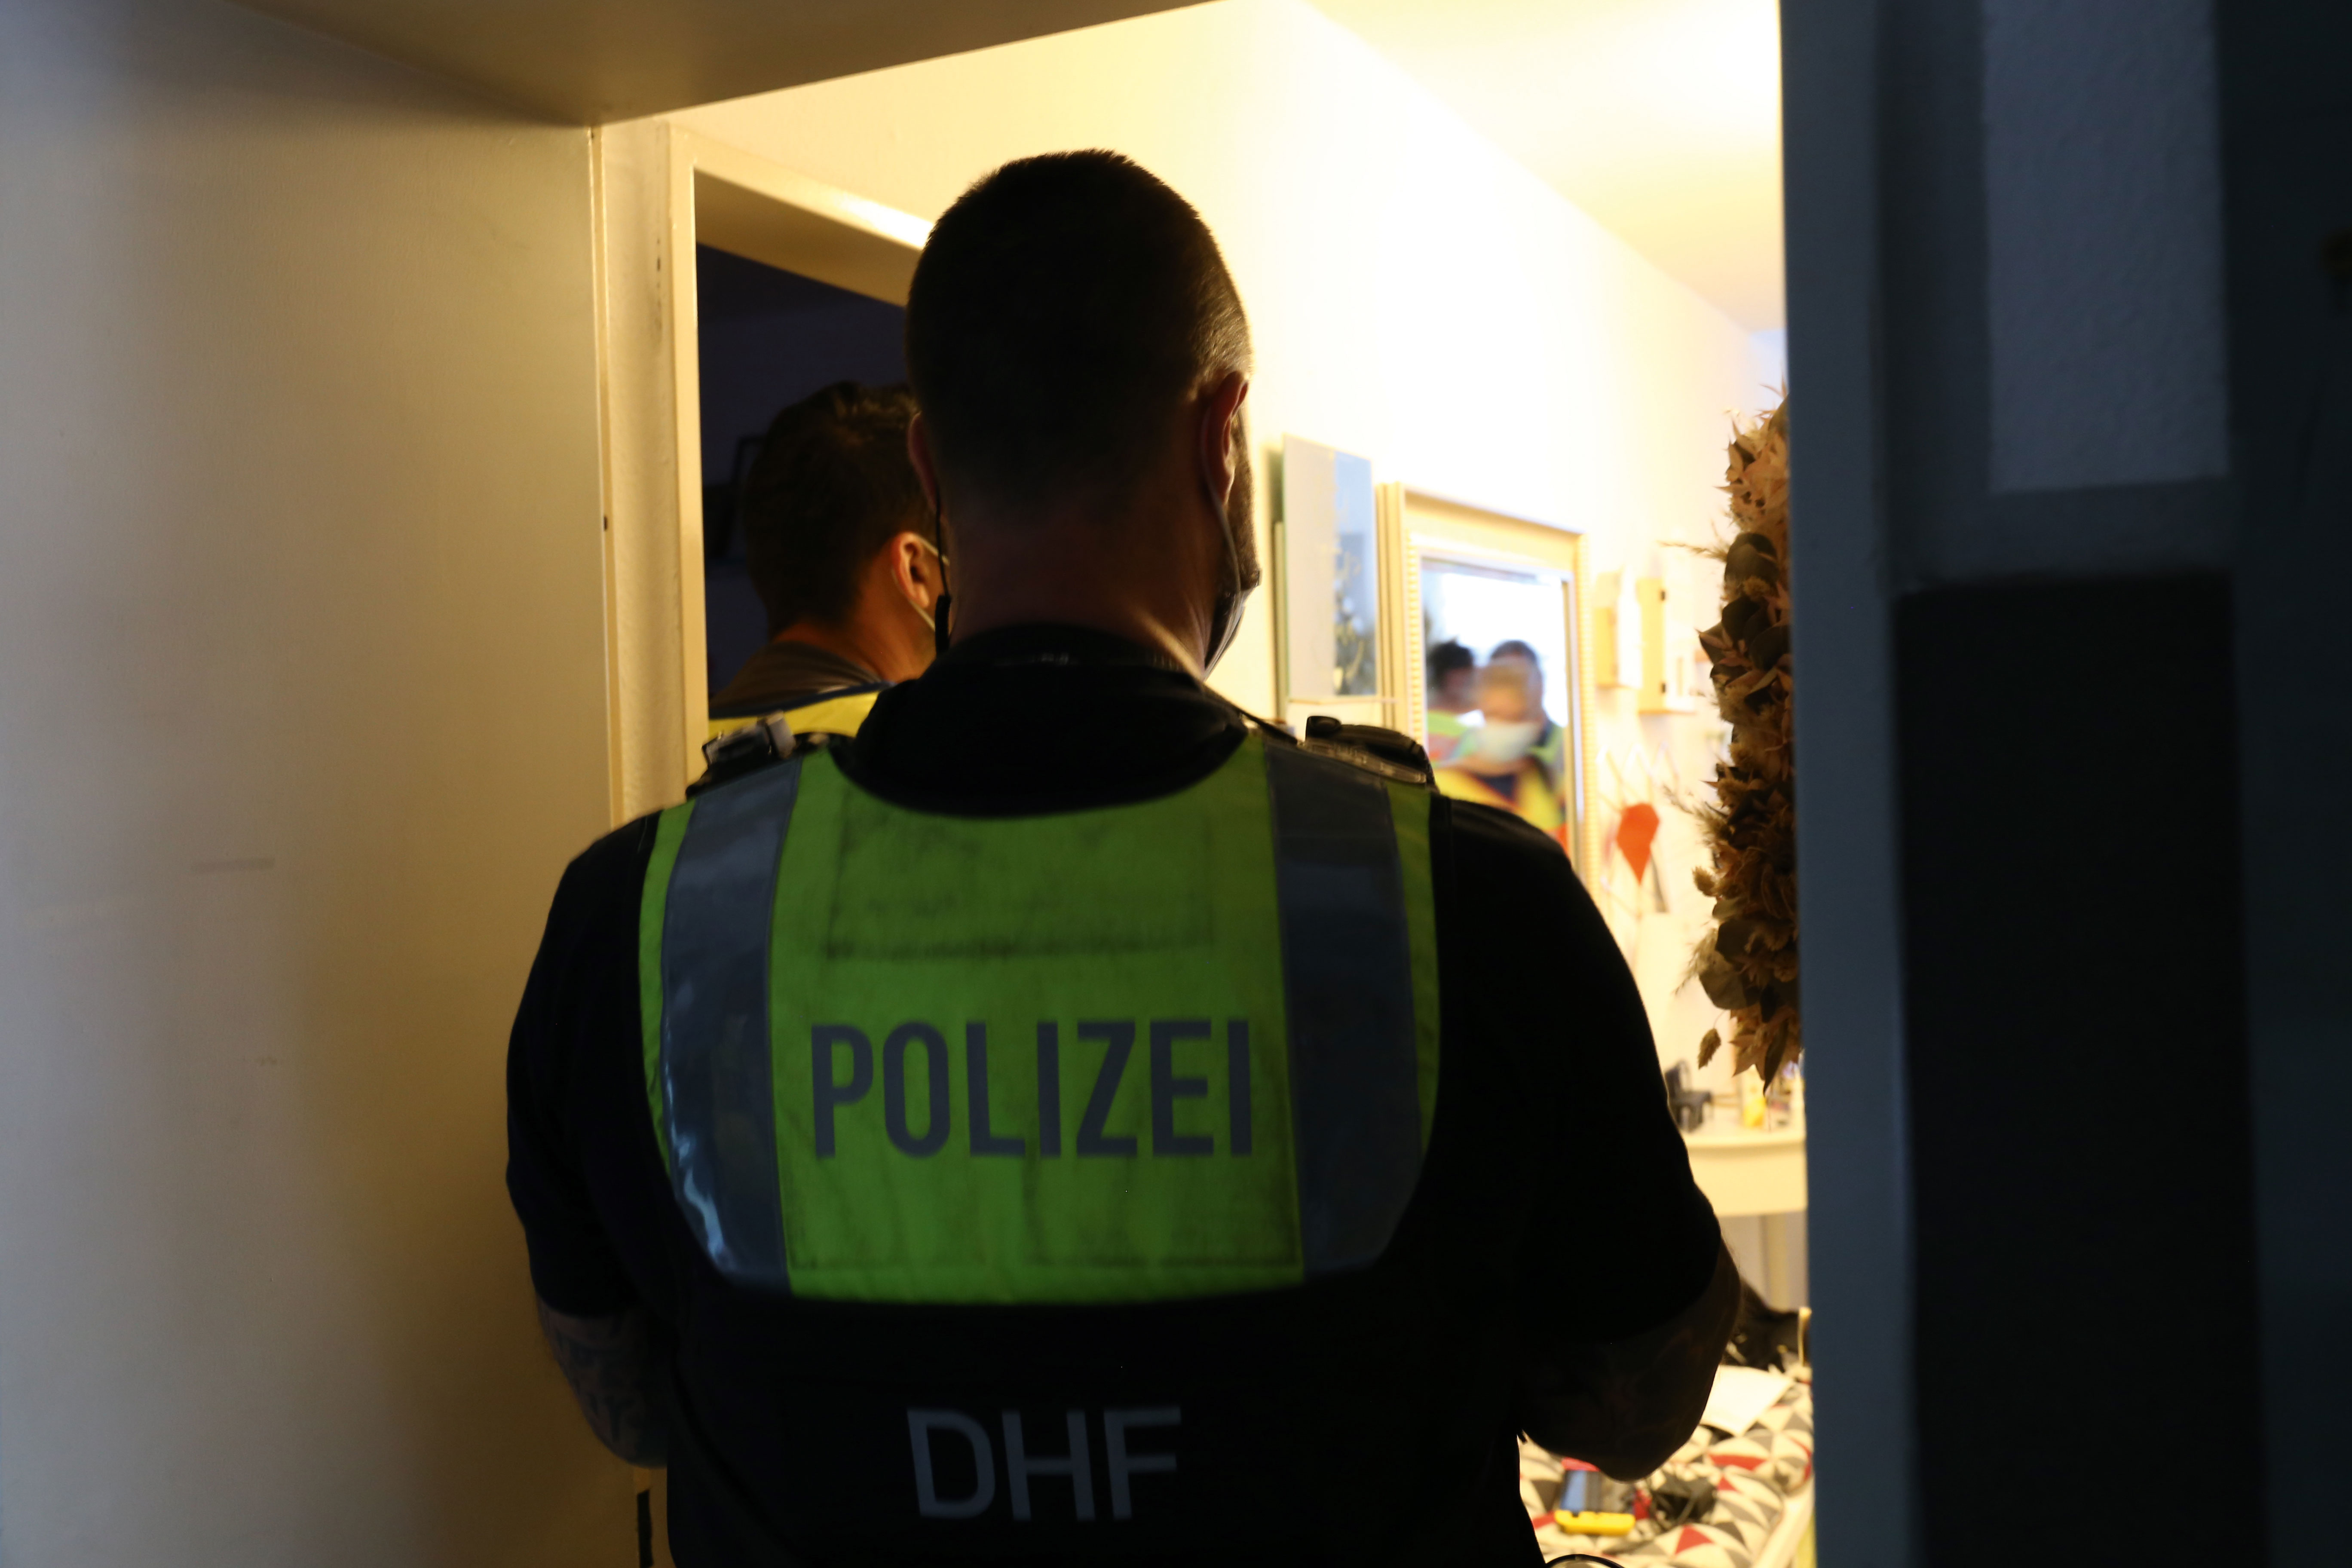 Police operation early in the morning in Duisburg Hochfeld